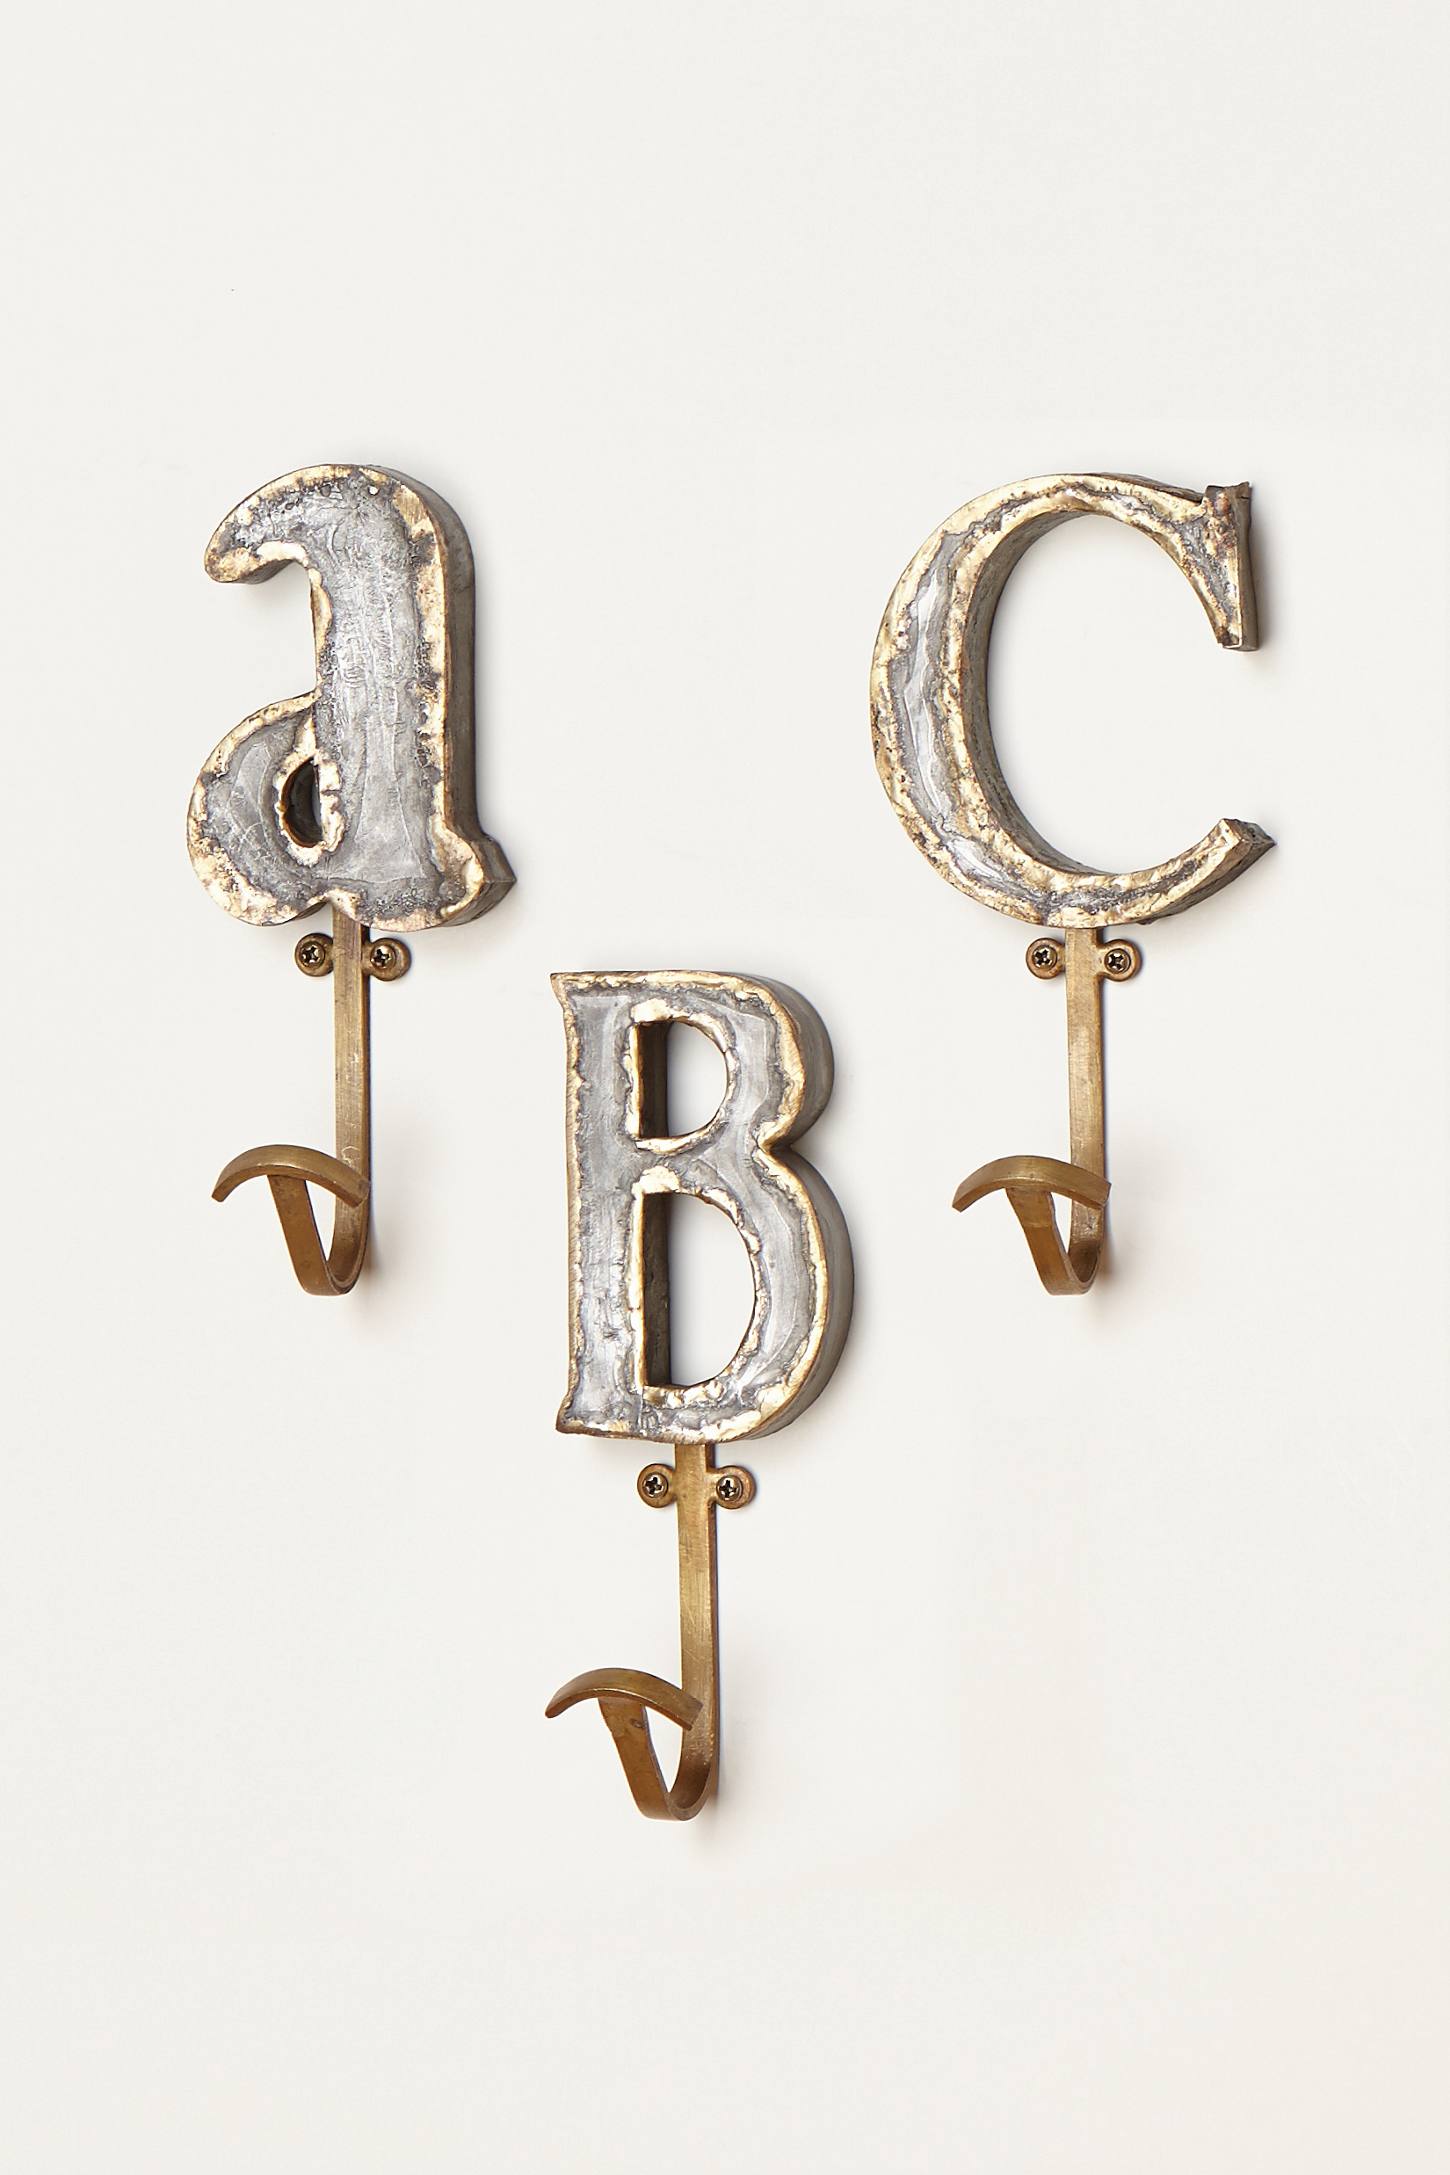 Shop Marquee Letter Hook from Anthropologie on Openhaus